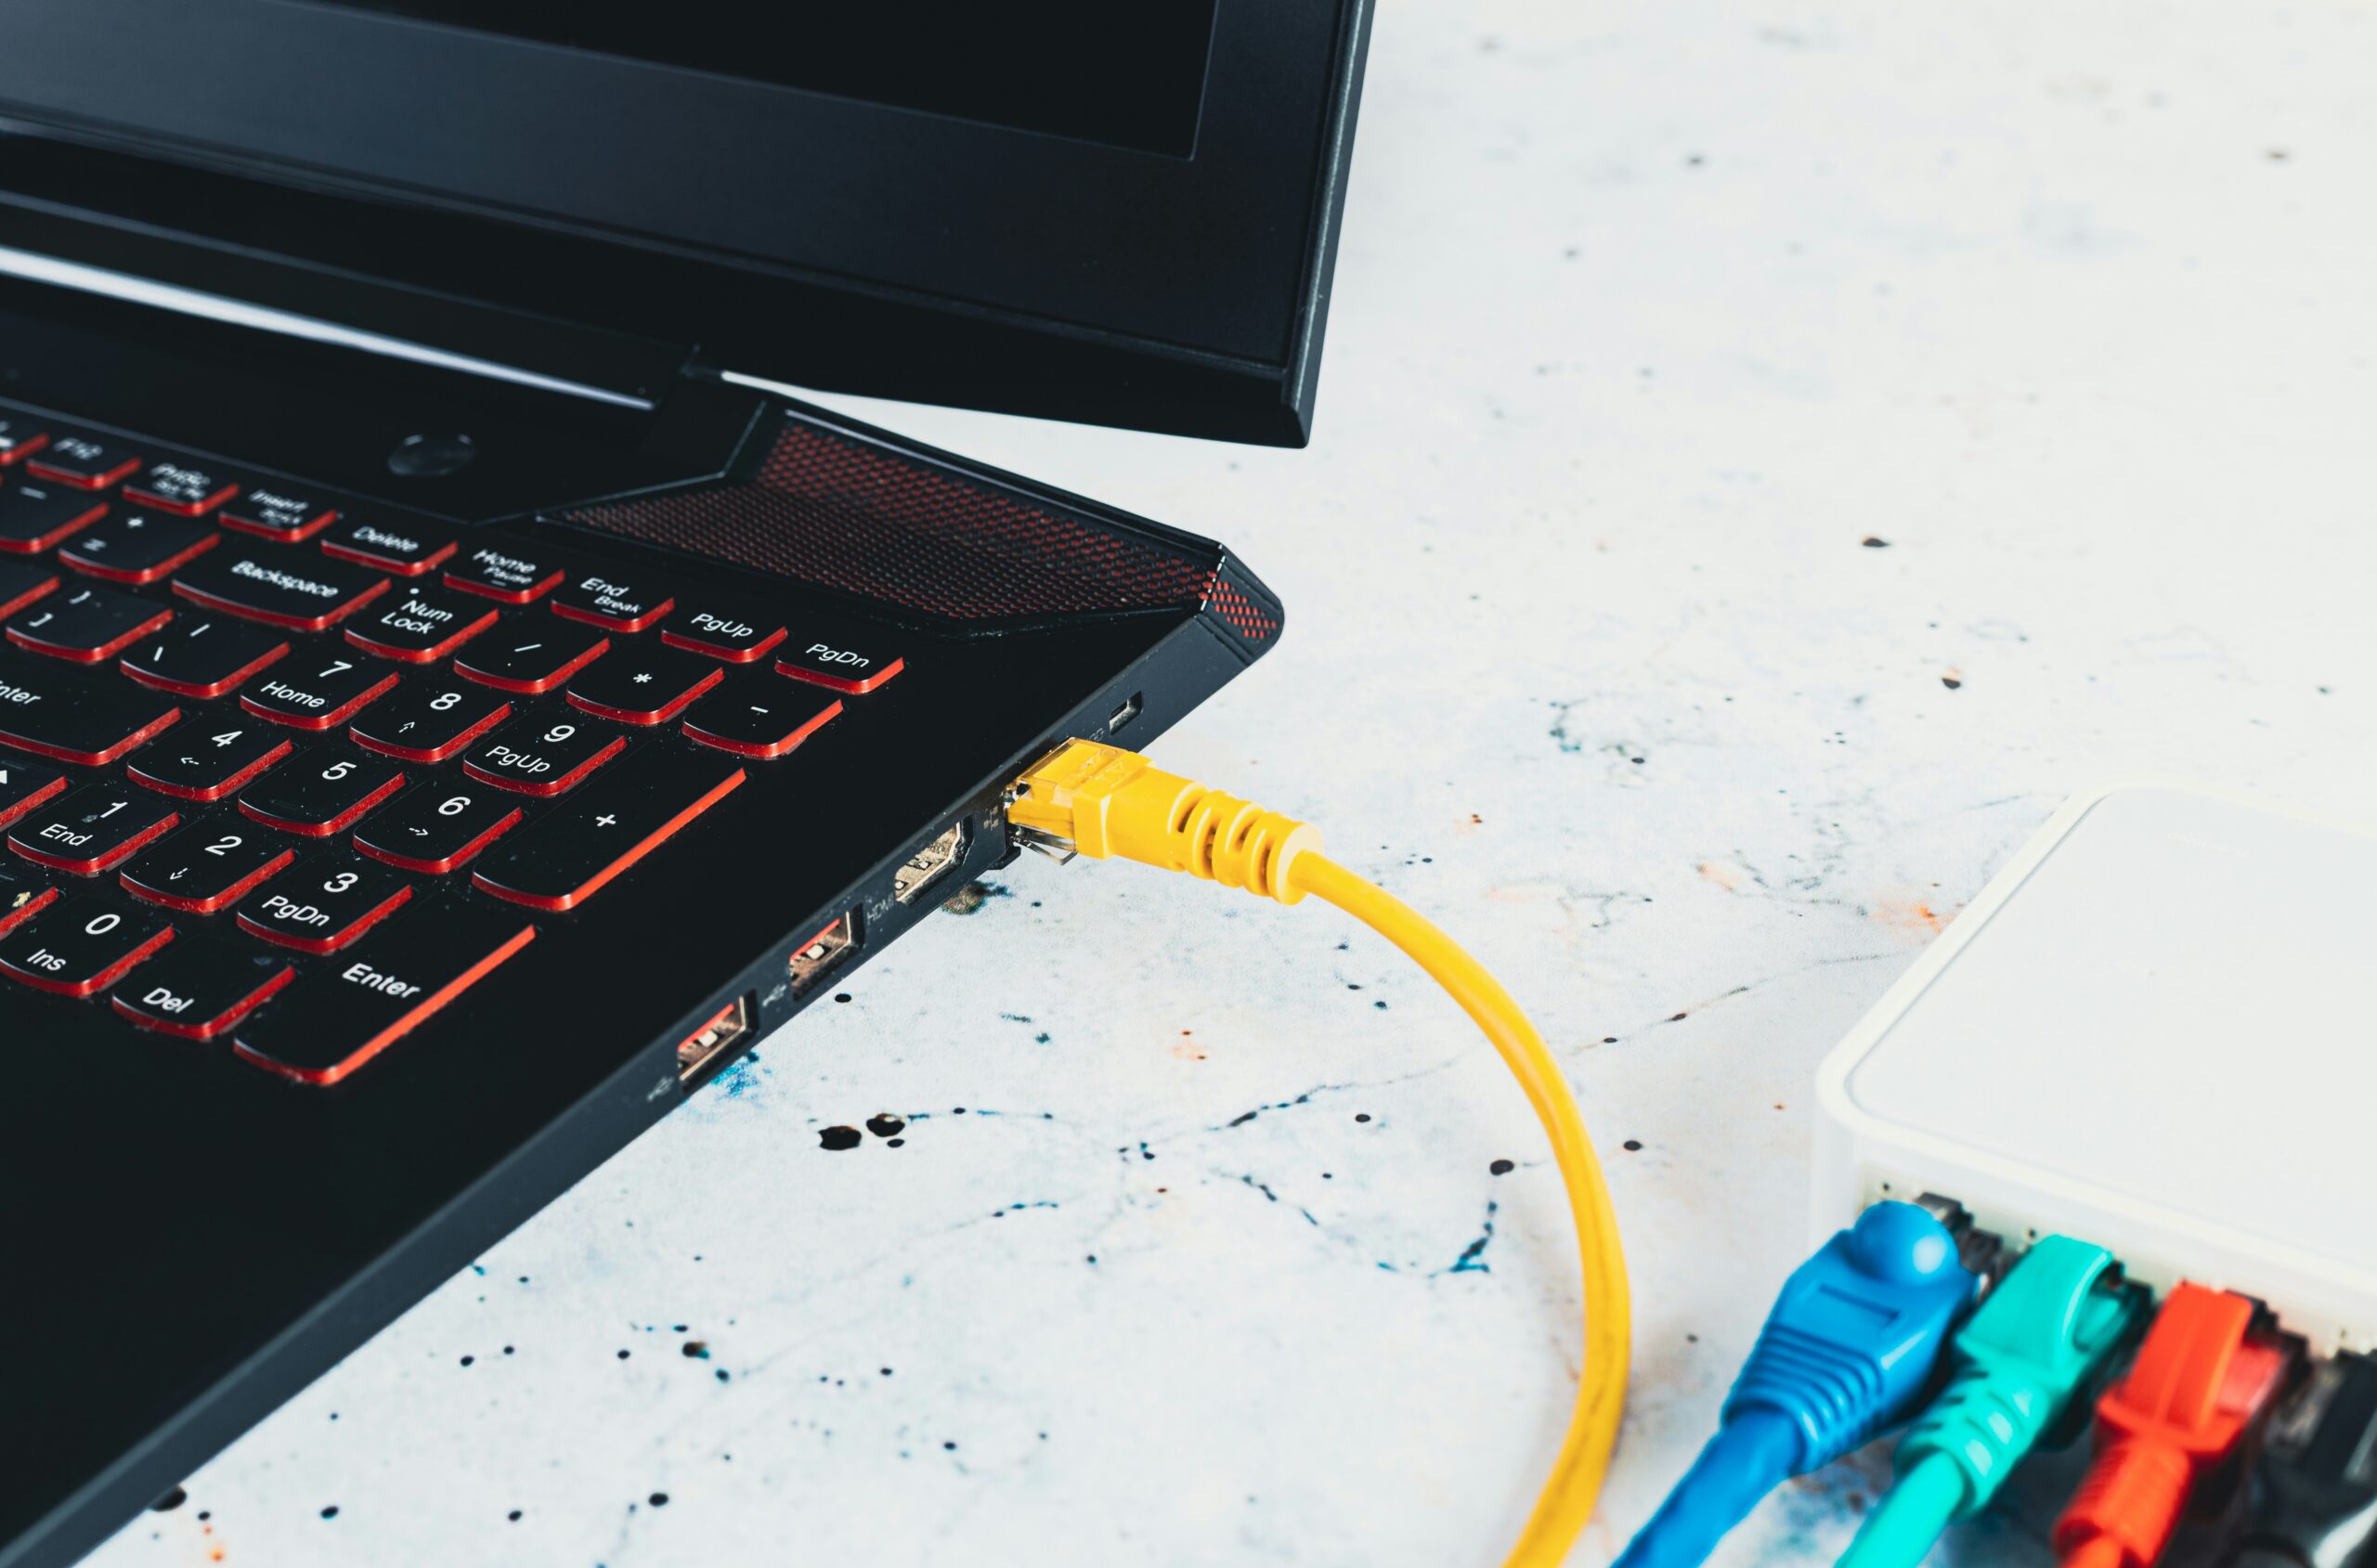 A laptop with a glowing red keyboard connected to a yellow ethernet cable, provided by an IT service management provider, next to a box of assorted colored network cables.